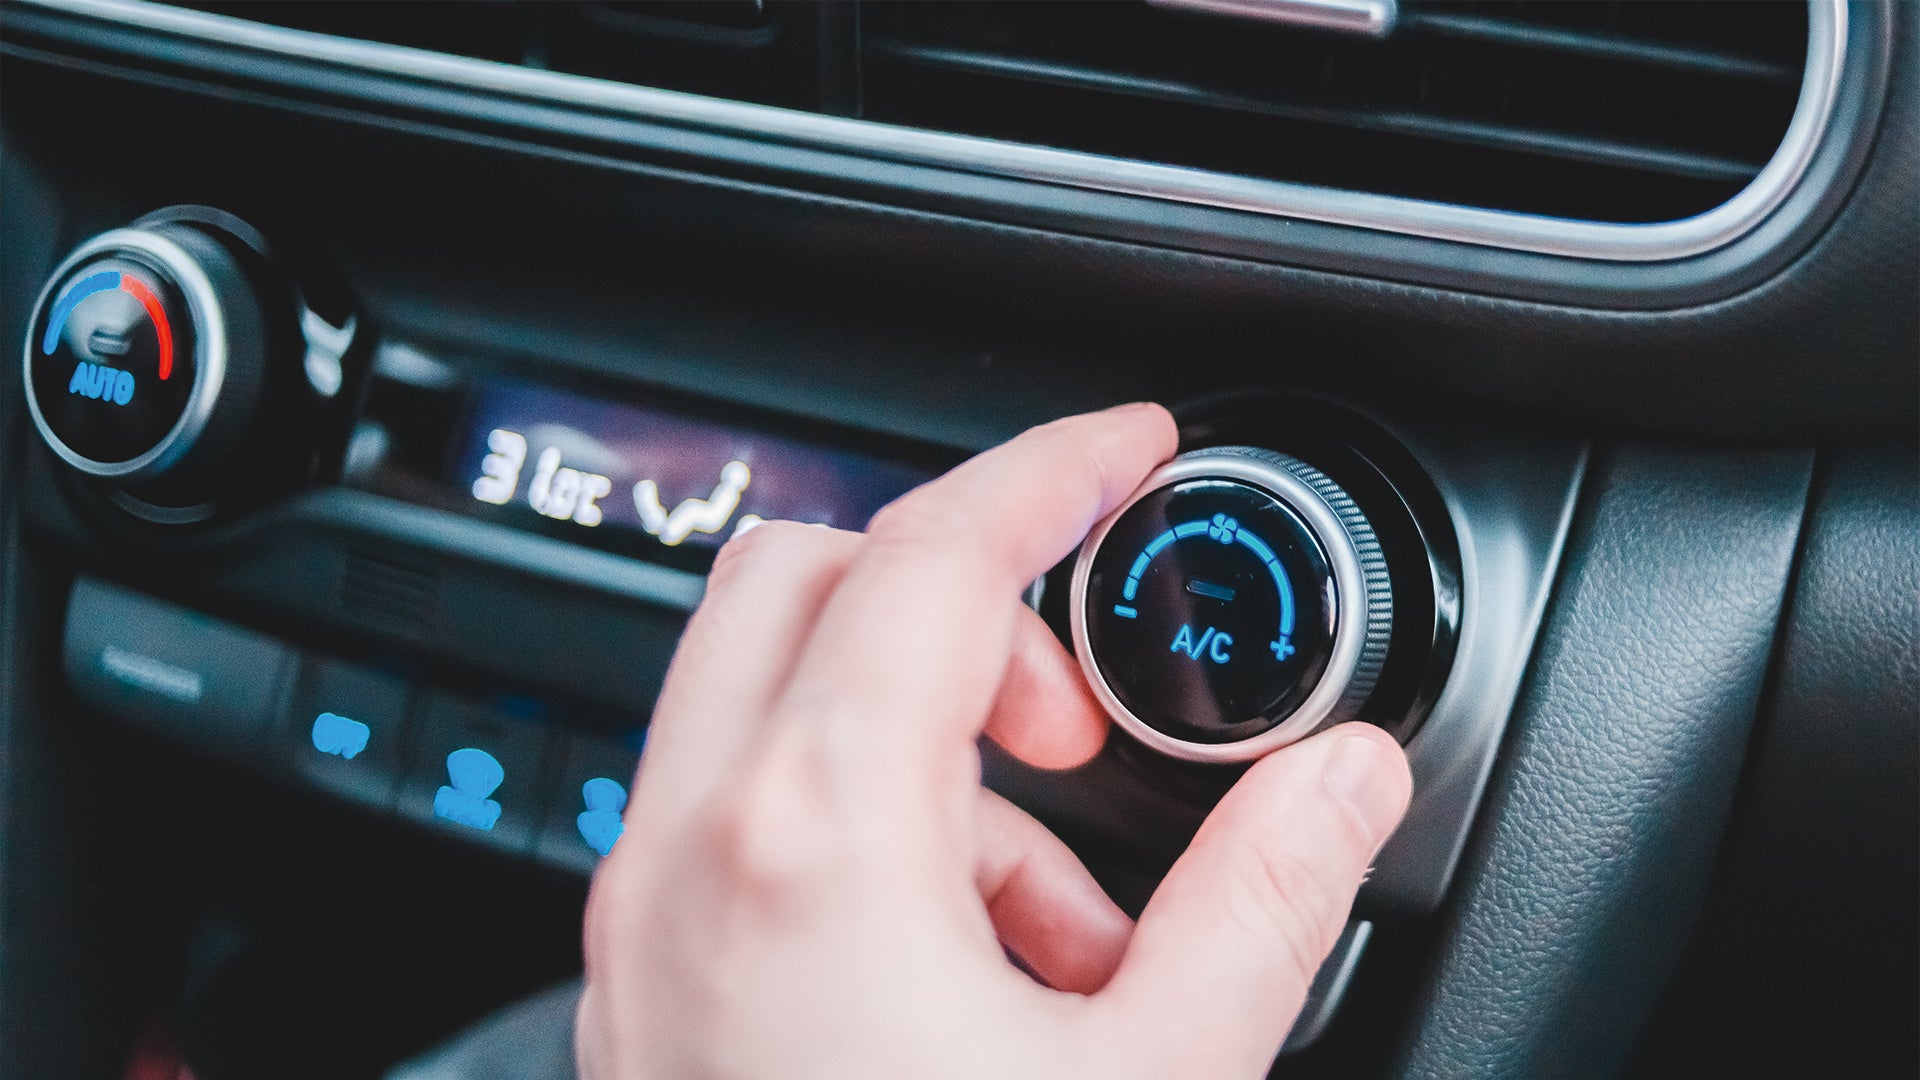 How to Maintain Your Car A/C (Air Conditioner) System?